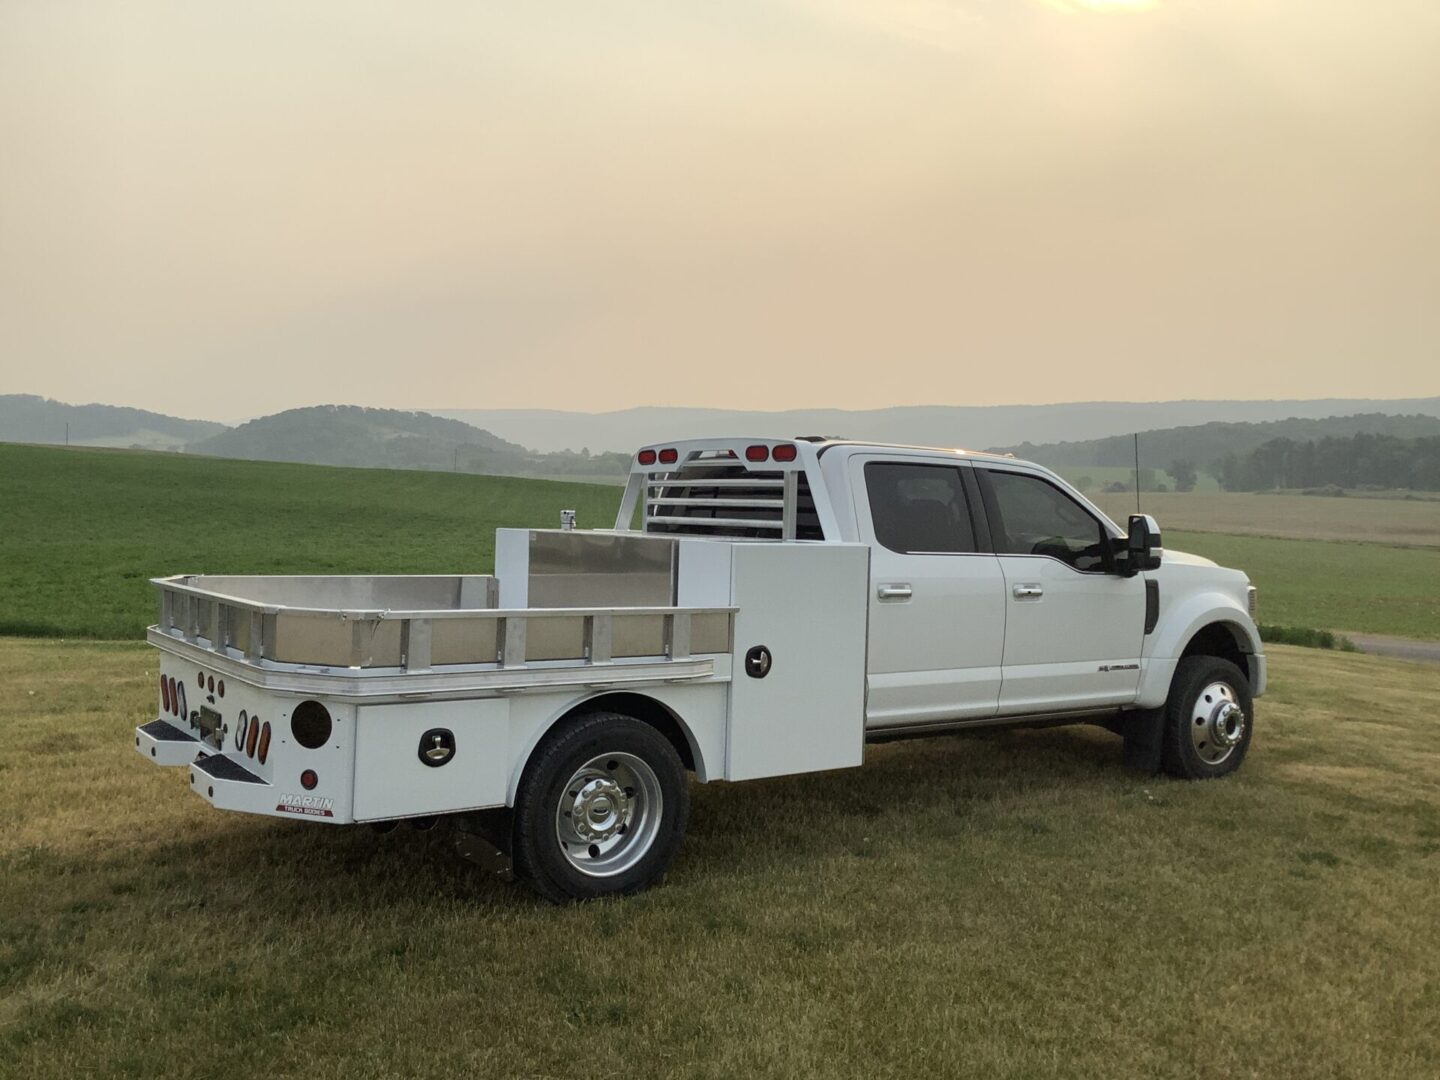 A white pickup truck with a specialized flatbed and storage compartments parked in a field at dusk.